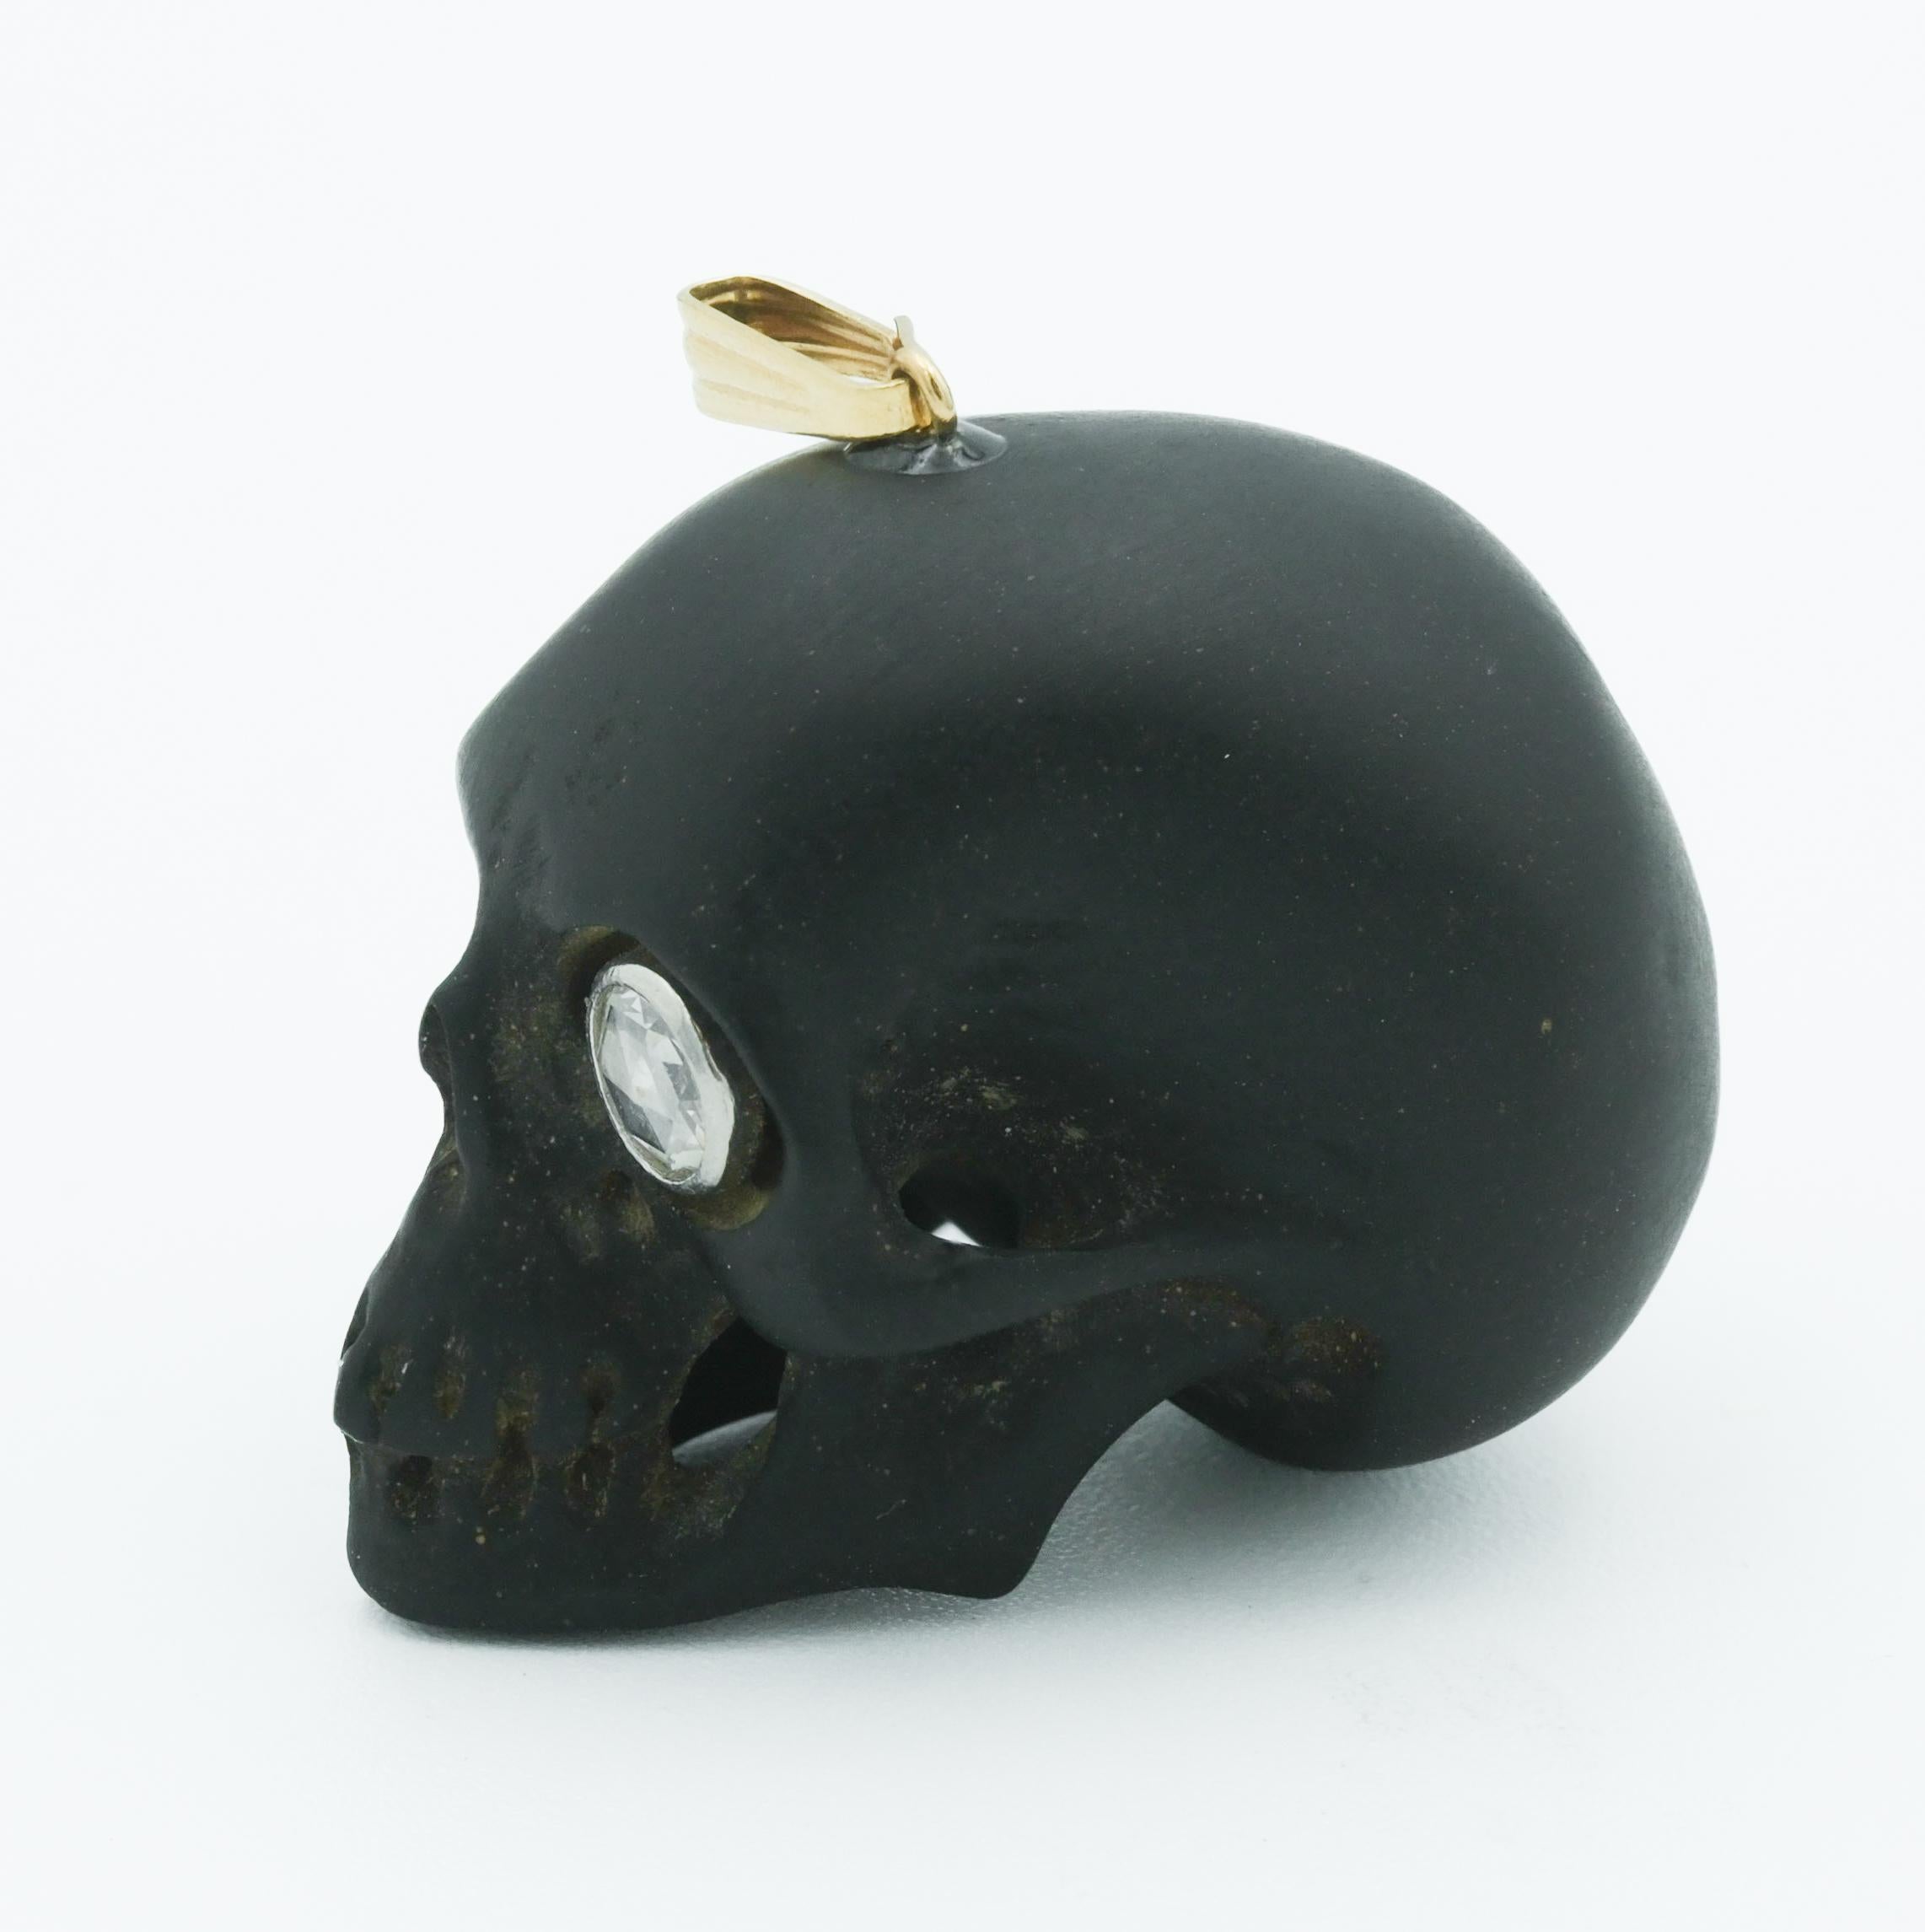 This striking vintage skull pendant is a captivating piece of jewelry that blends gothic charm with classic elegance. The pendant is skillfully carved from what appears to be jet or charcoal, providing a deep, matte contrast to the gleaming